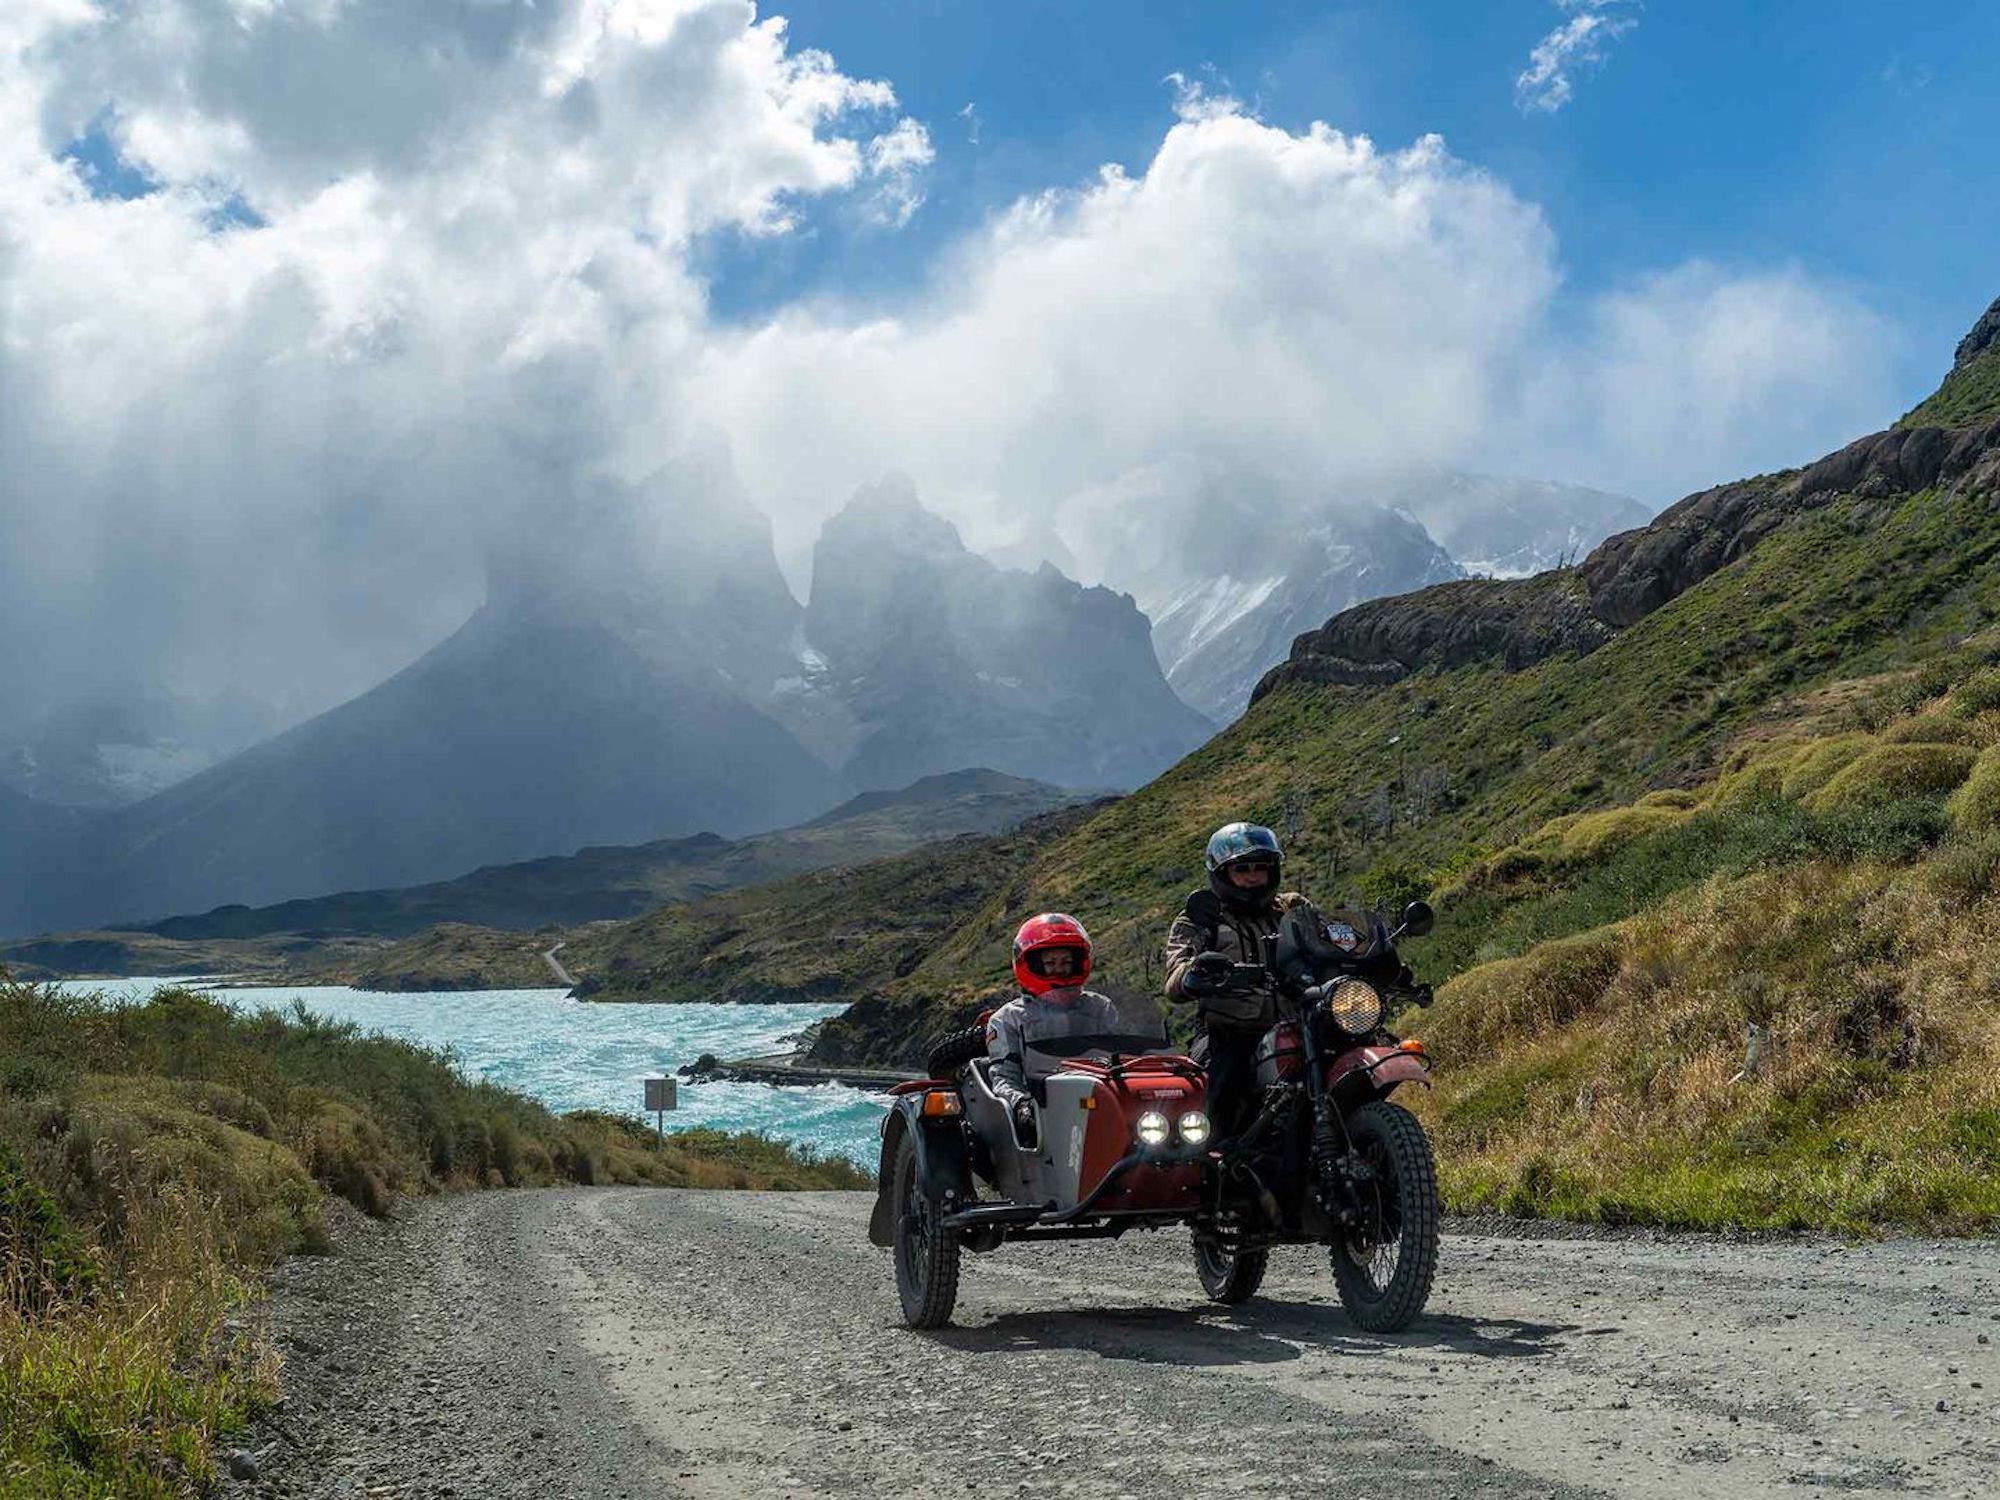 A Ural sidecar motorcycle set against a beautiful background. Media sourced from CycleWorld, via Ural.